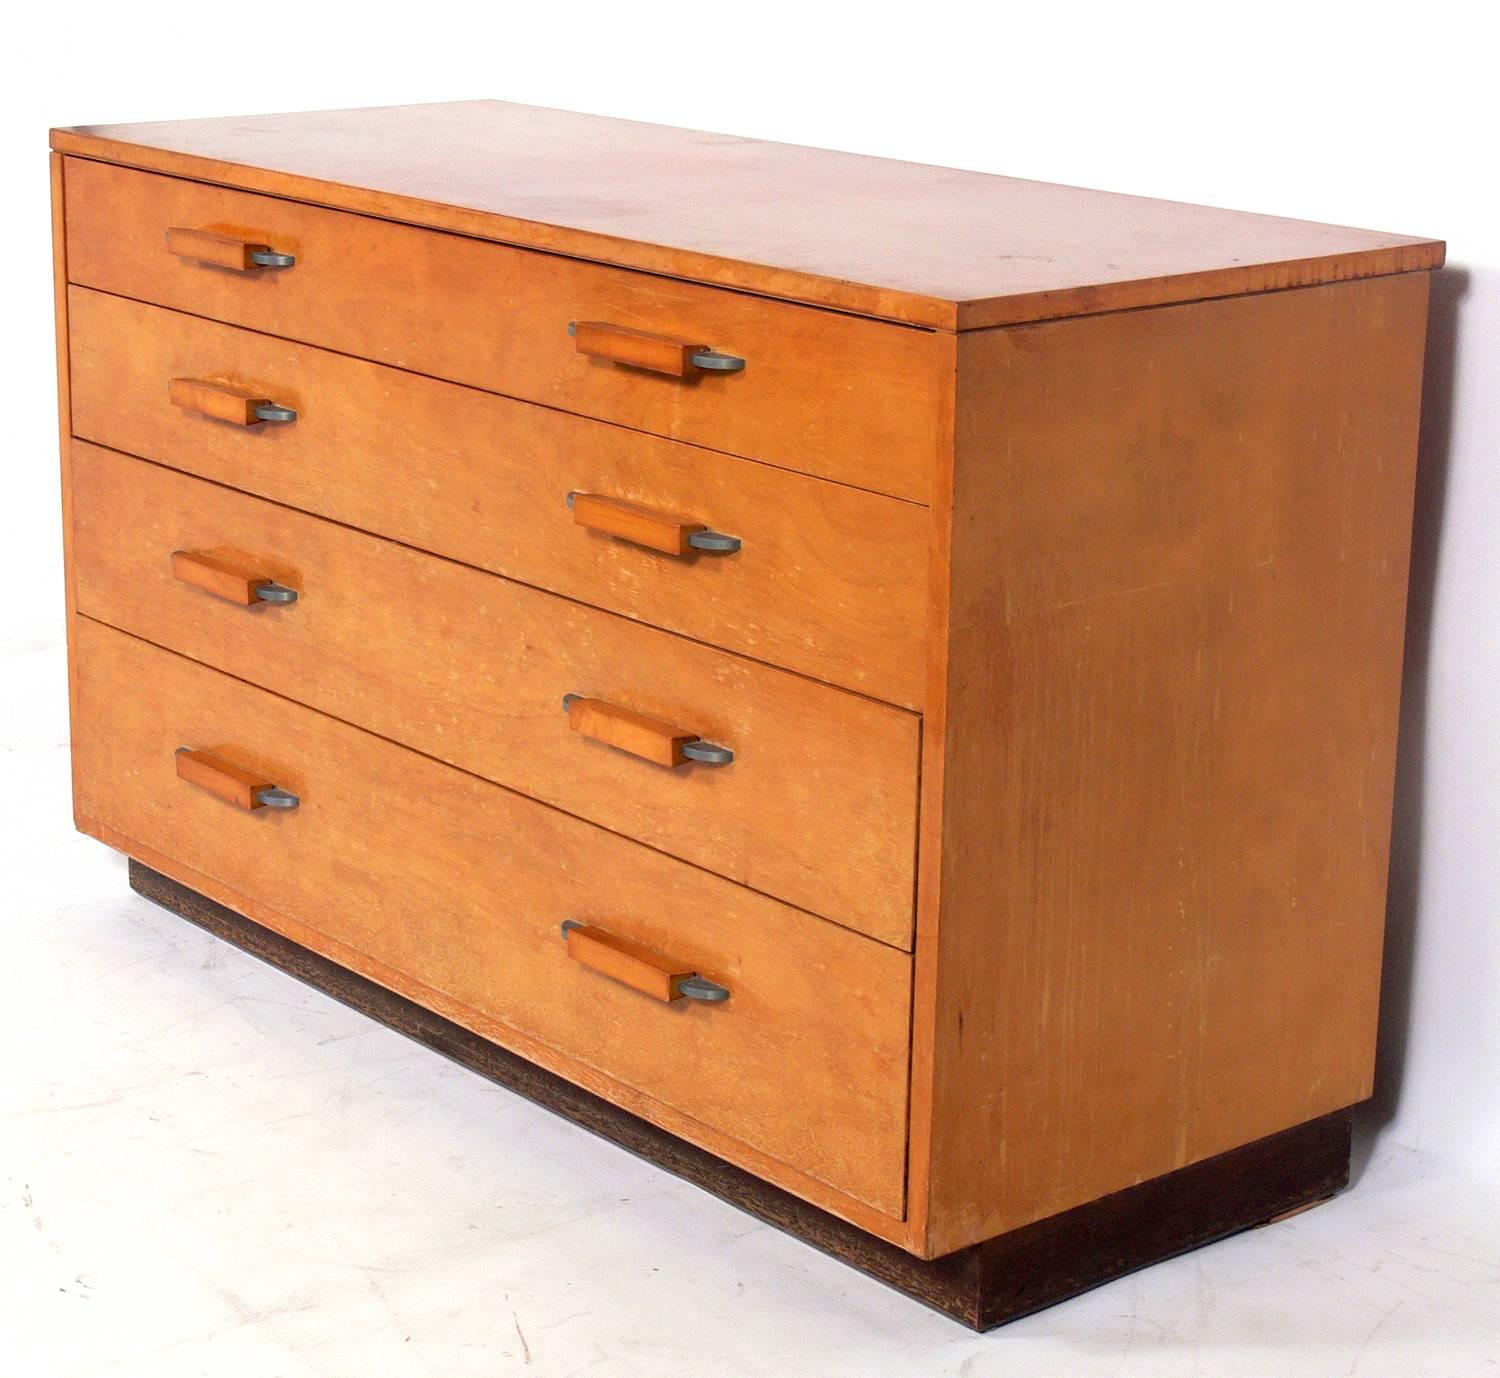 Modern birch dresser or chest, designed by Eliel Saarinen and his daughter Pipsan Saarinen Swanson for the Johnson Furniture Company, American, circa 1940s. 

In 1937 they designed these pieces as part of the 